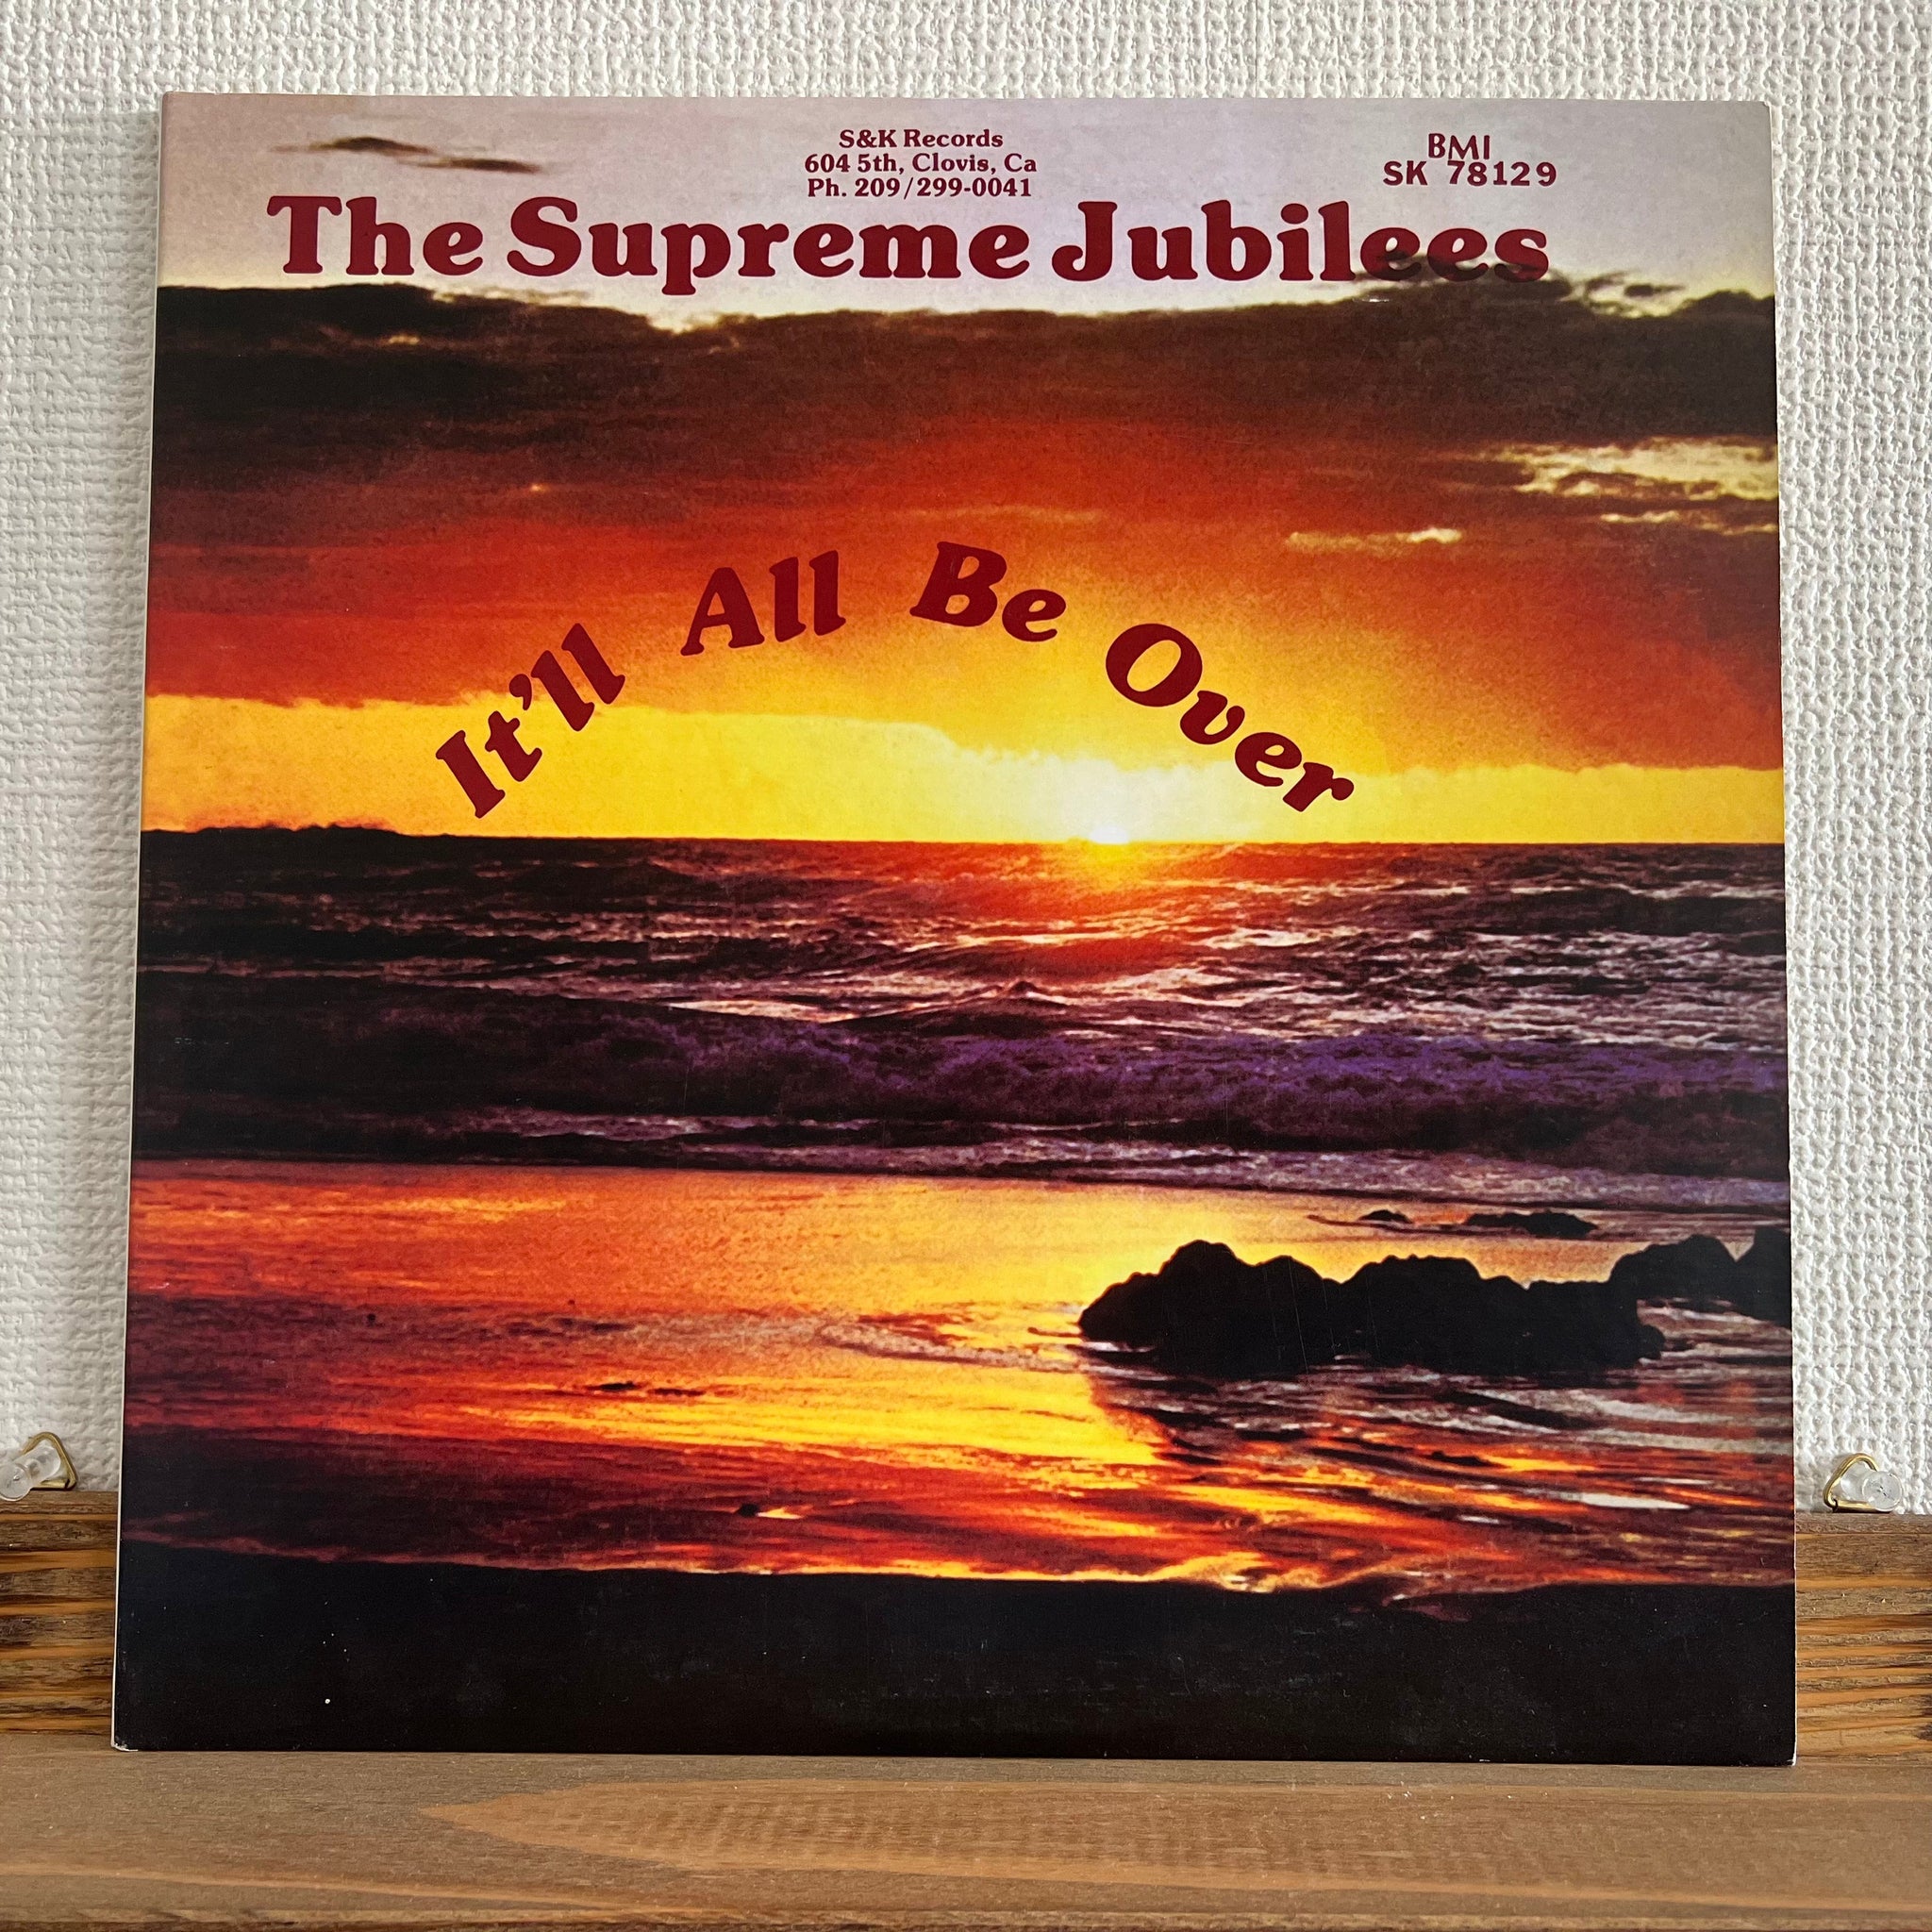 The Supreme Jubilee - It'll All Be Over